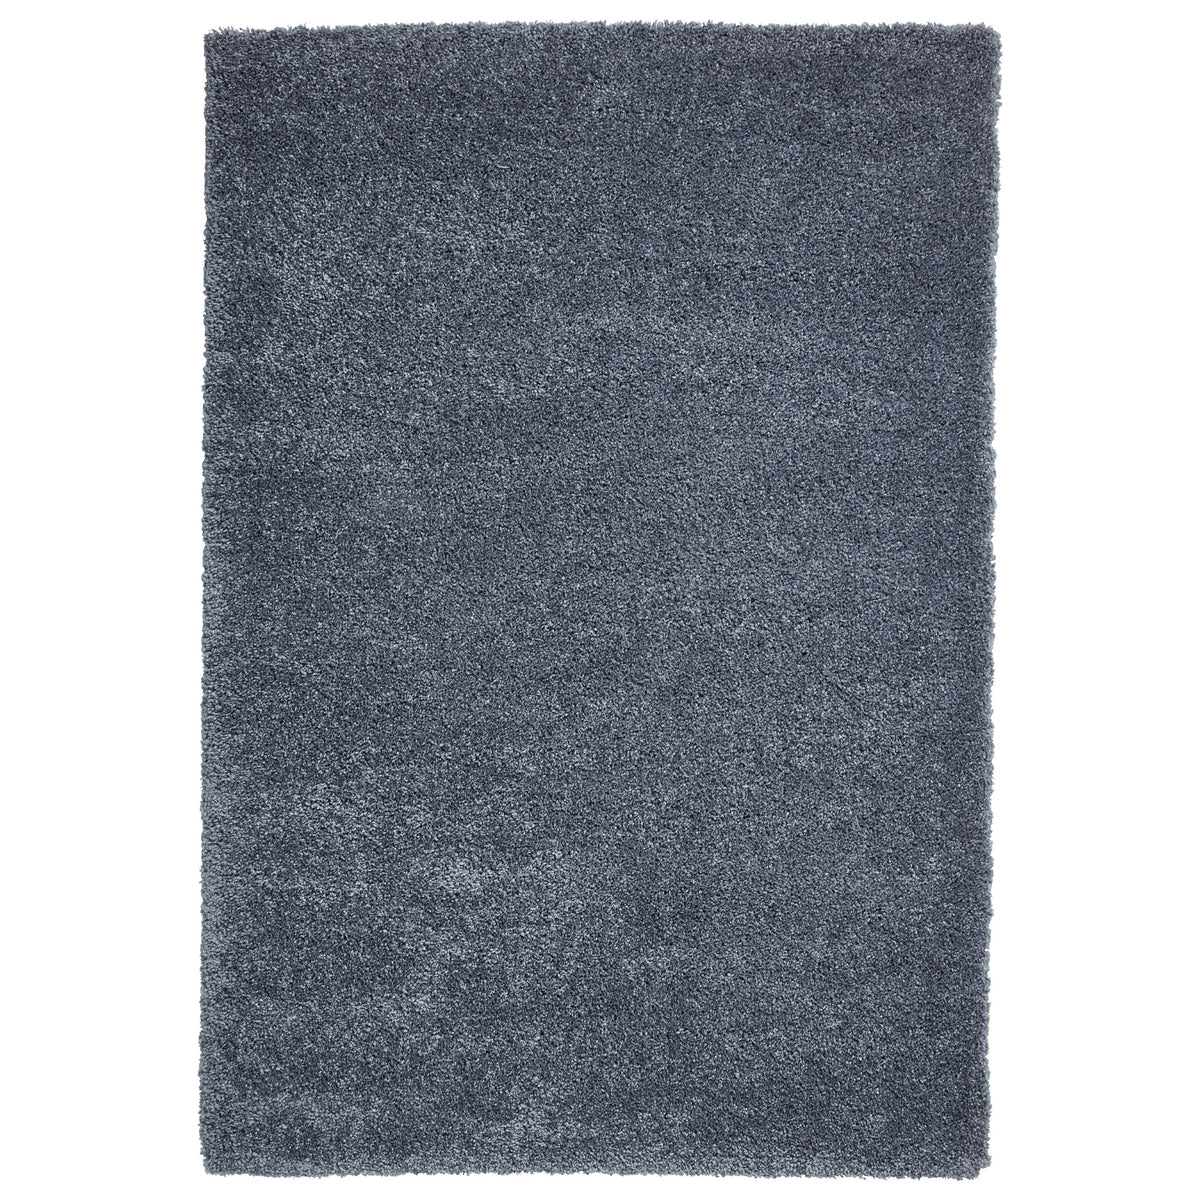 Roswell Slate Grey Stain Resistant Shaggy Rug from Roseland Furniture